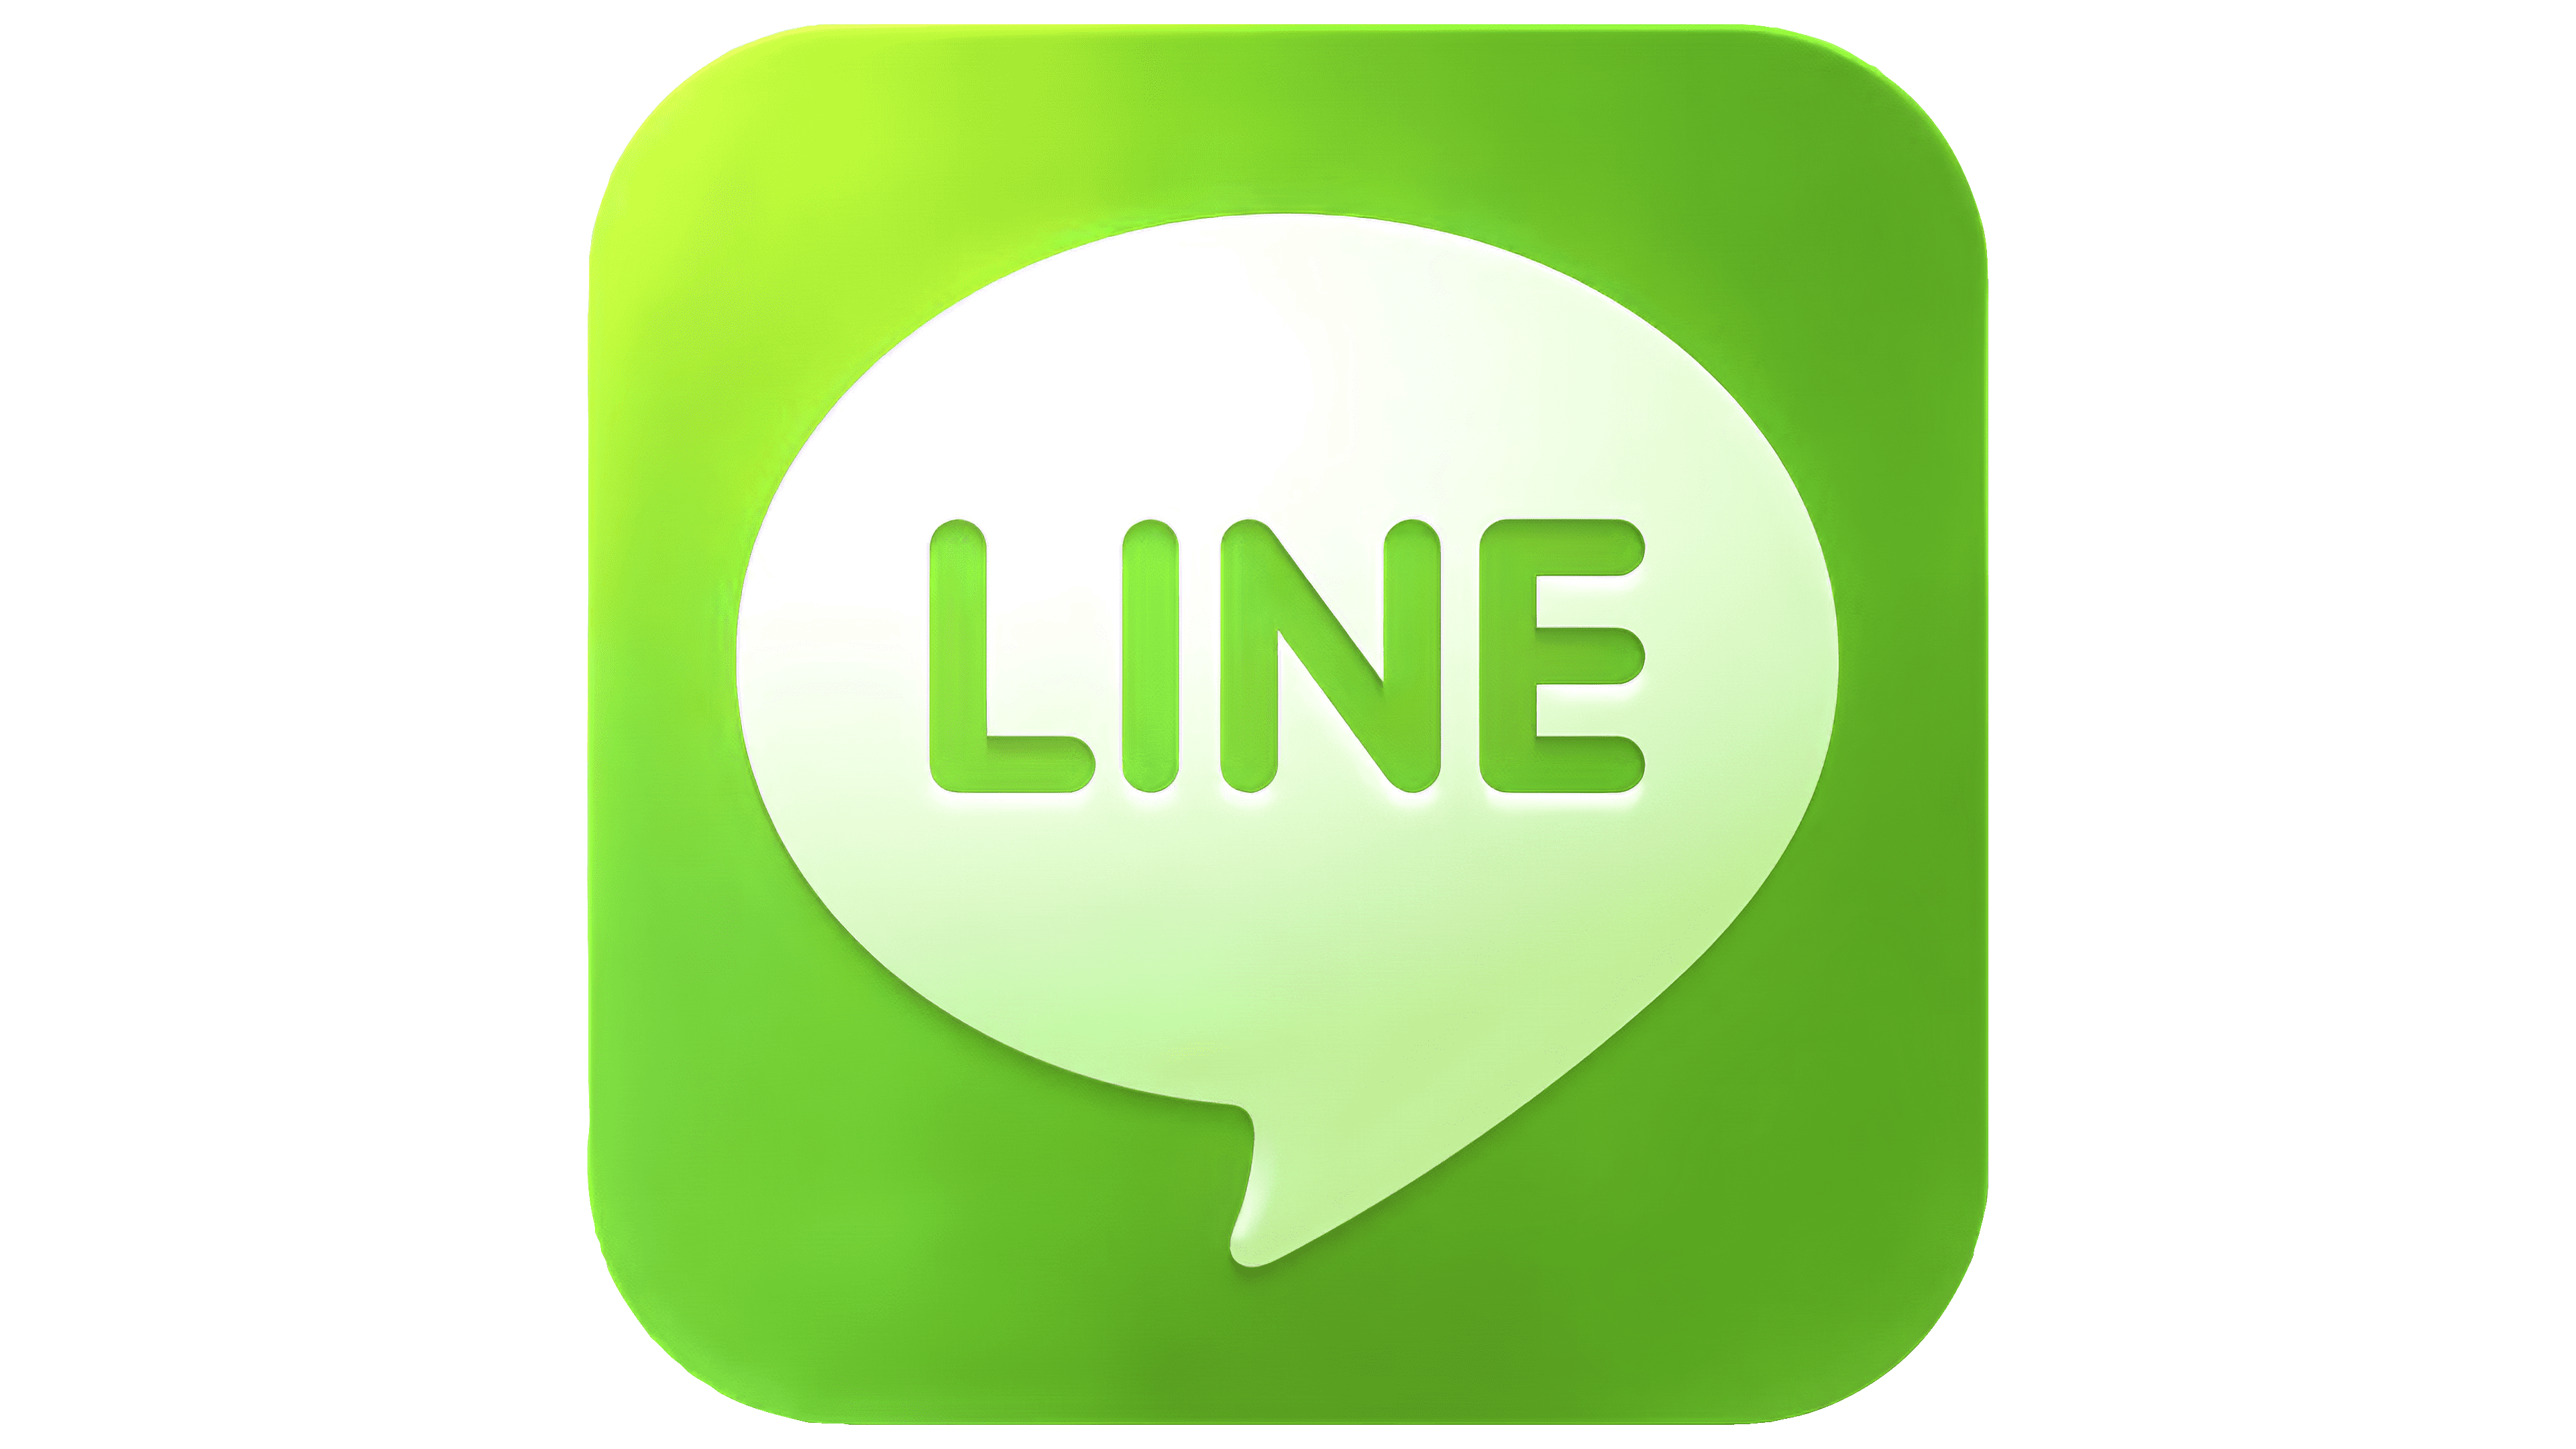 Line Logo, PNG, Symbol, History, Meaning